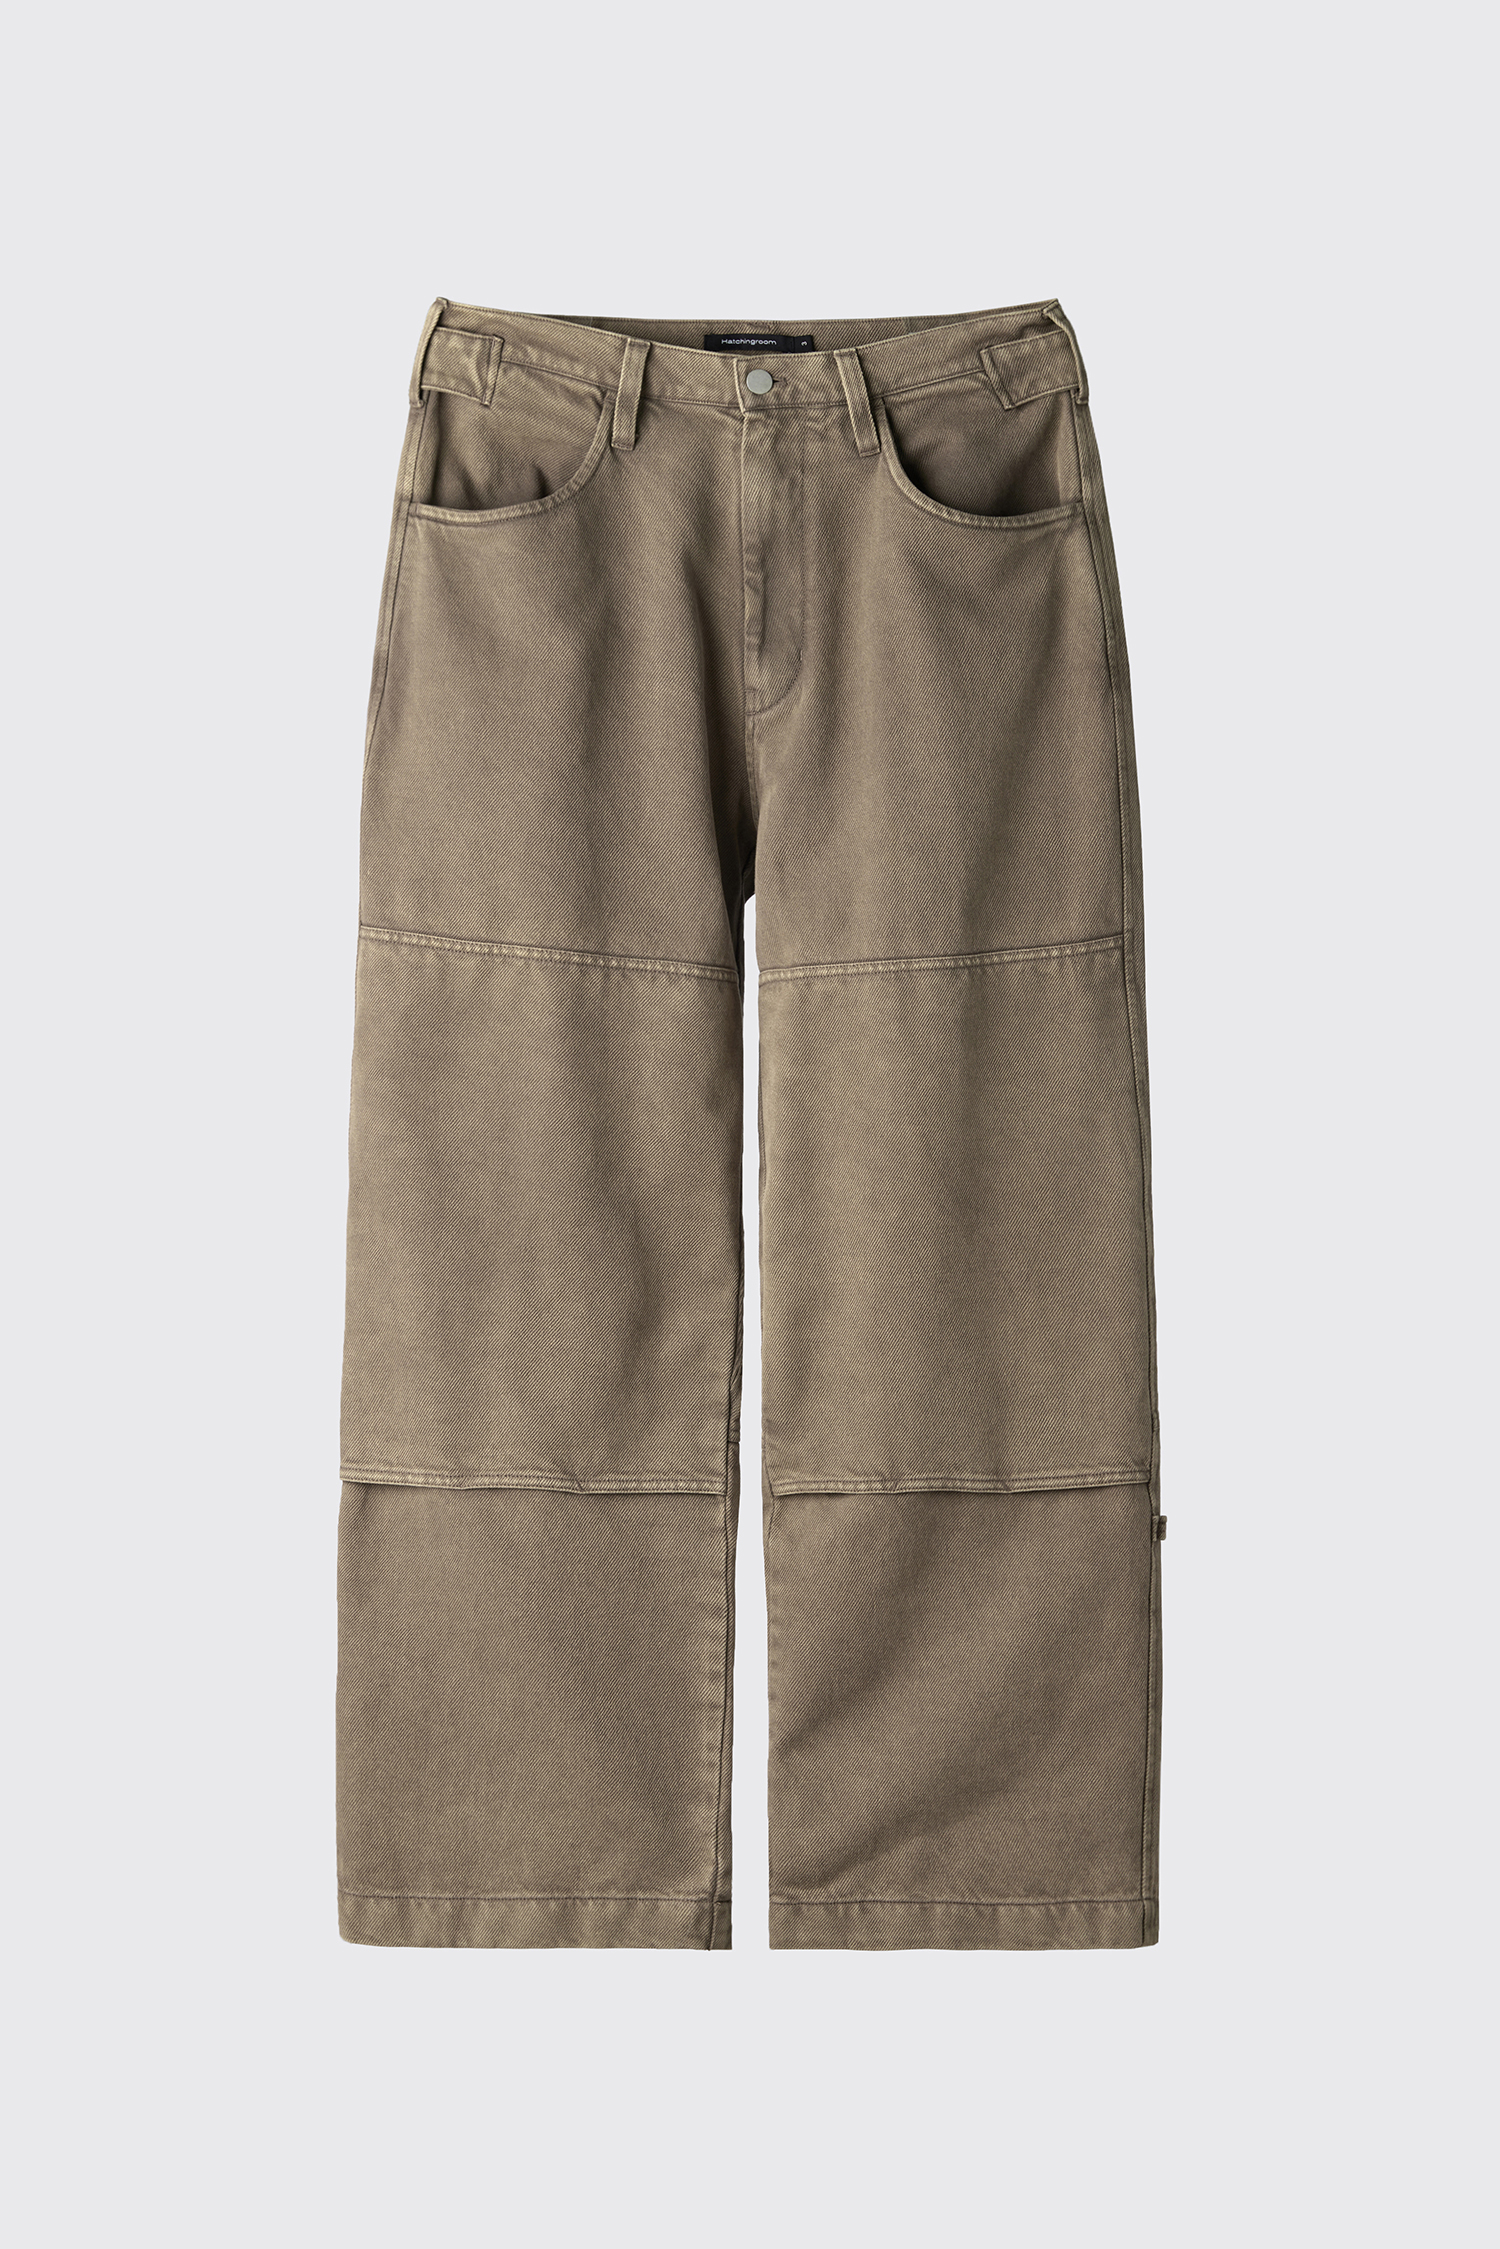 Double Knee Work Pants Washed Beige